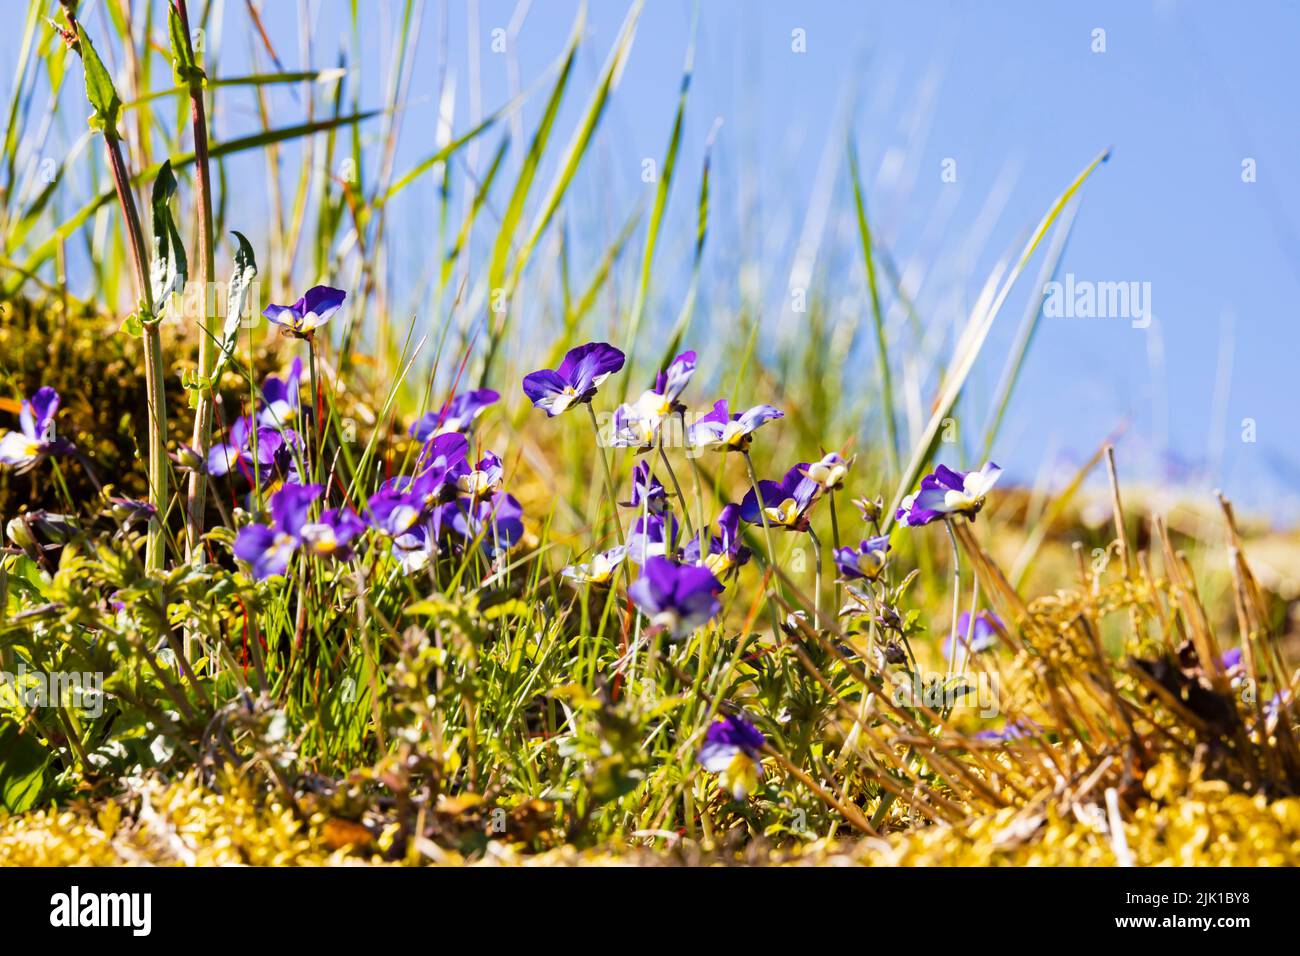 Purple pansies growing on the grass roof of a traditional Norwegian farm hut at Breng Seter on the shores of Lake Lovatnet.  Olden, Norway Stock Photo